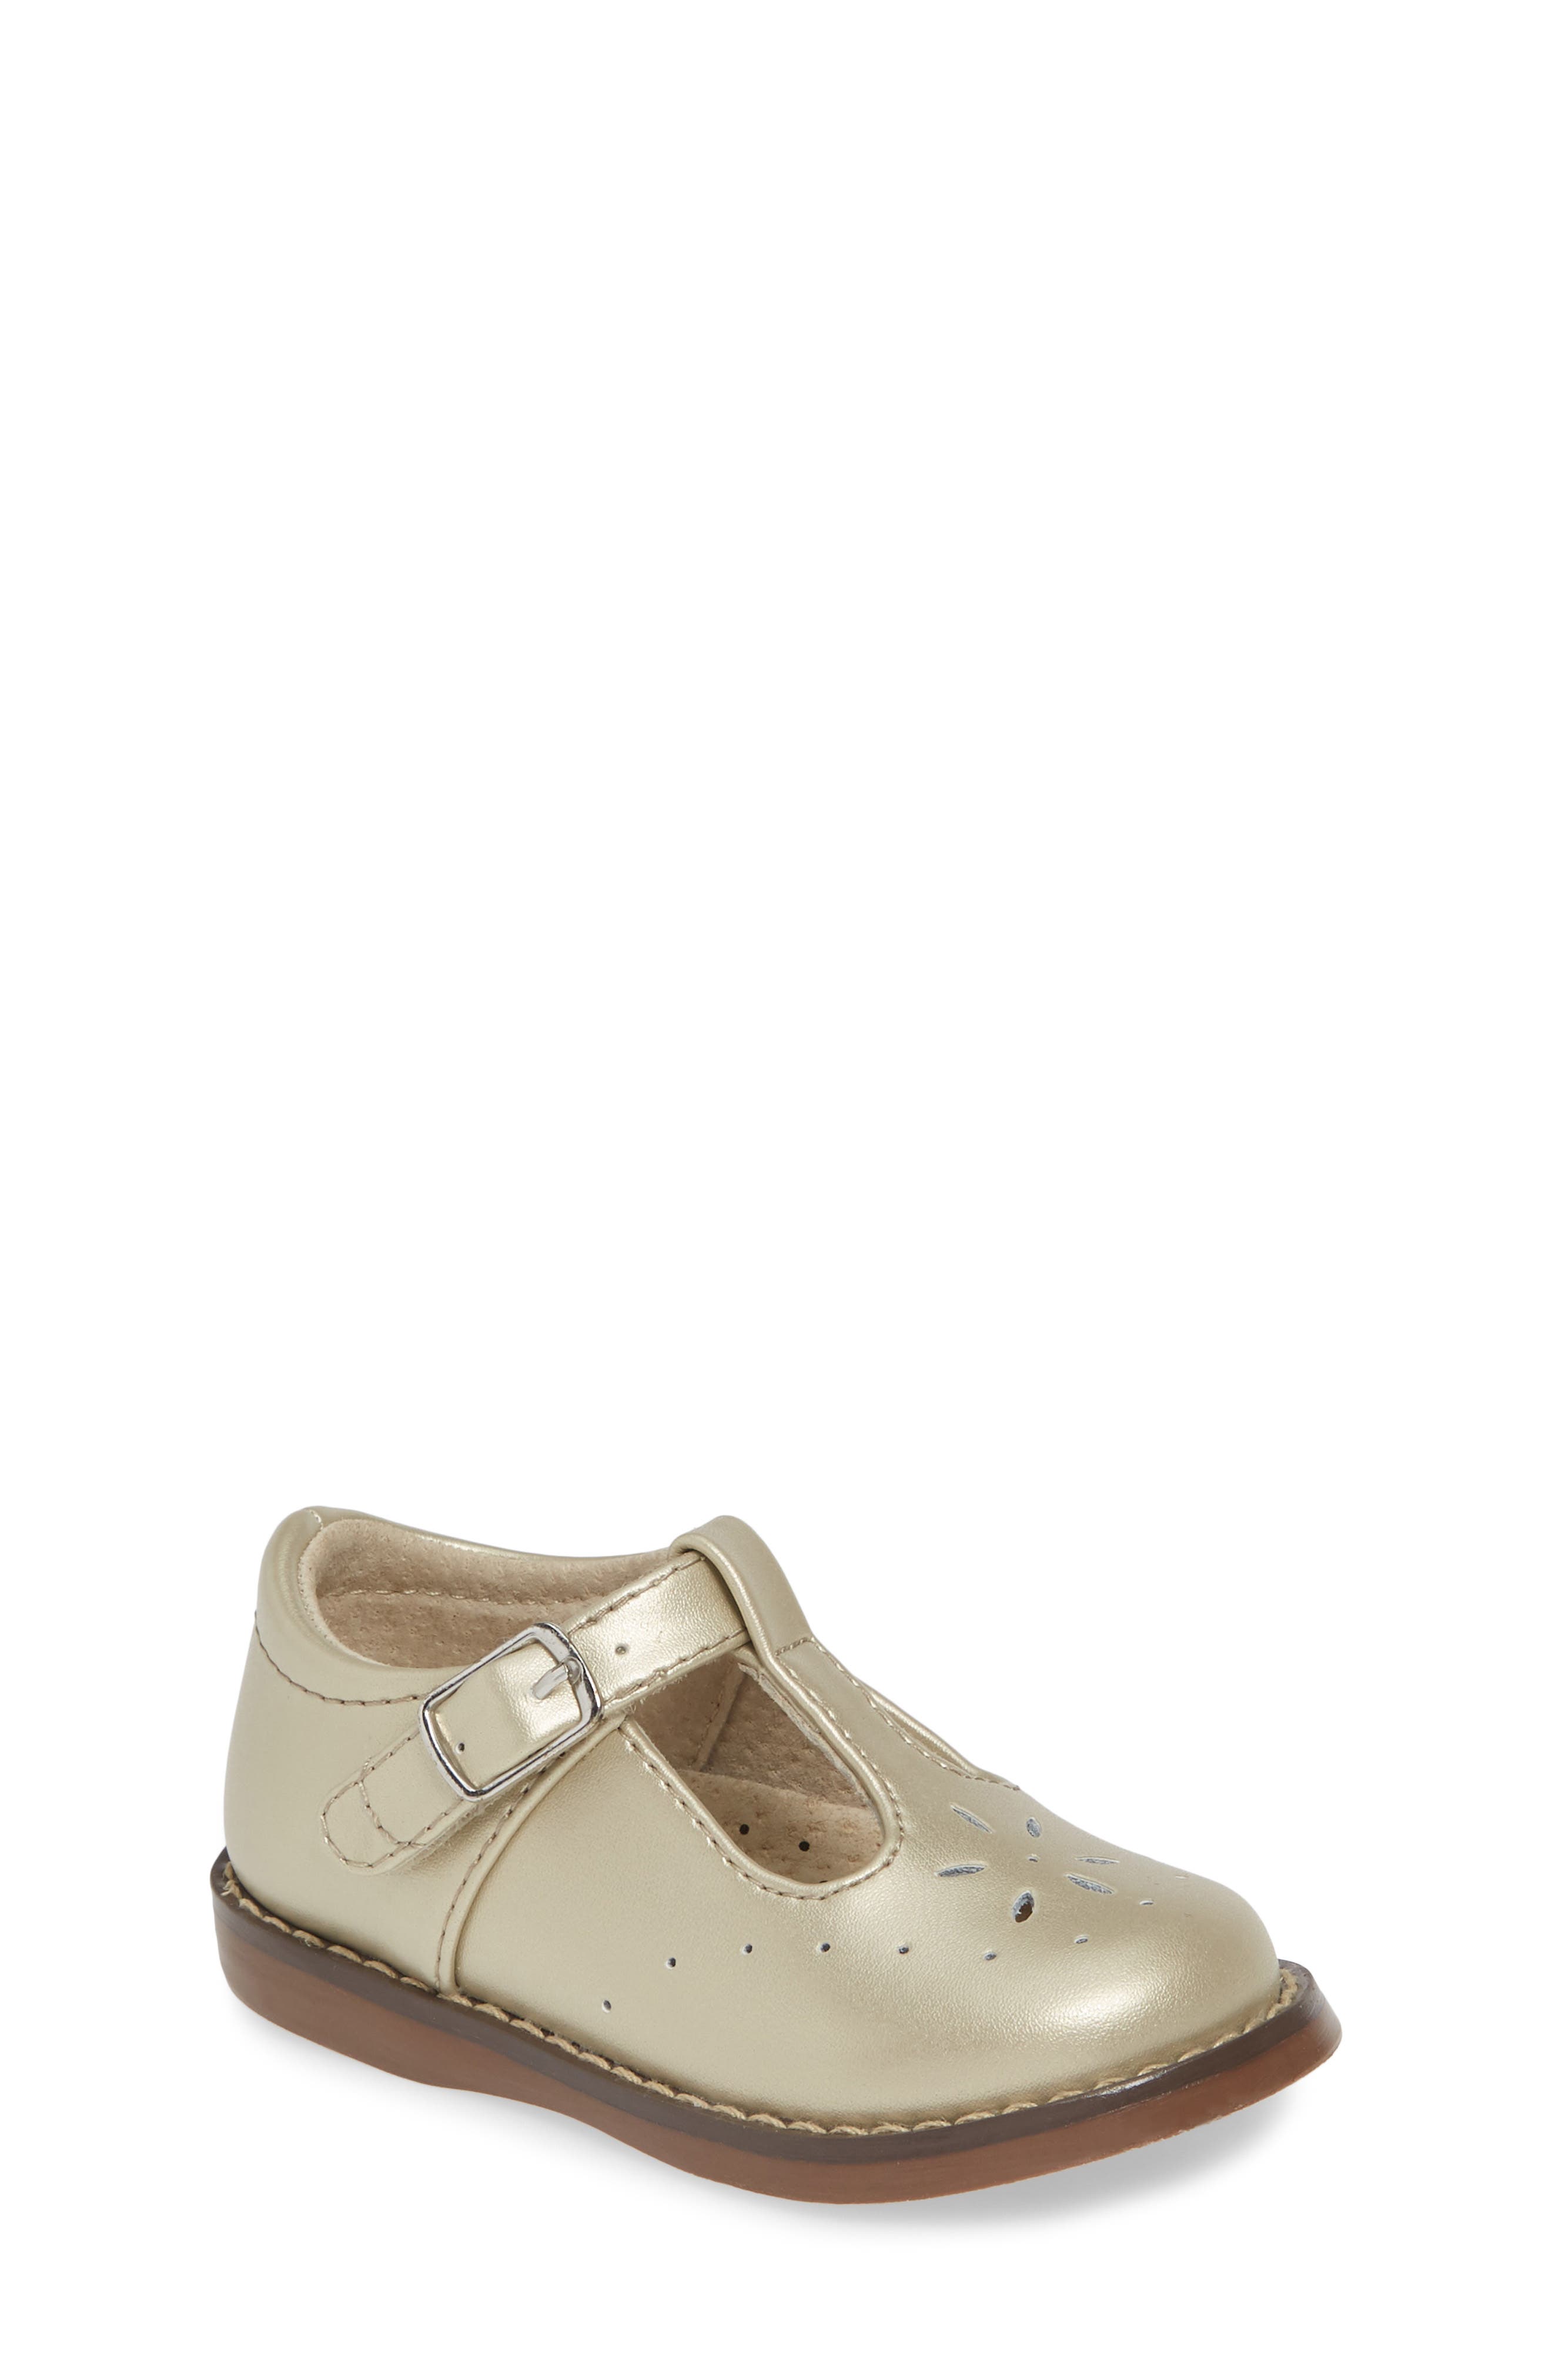 Toddler Girls' Beige Shoes (Sizes 7.5-12)